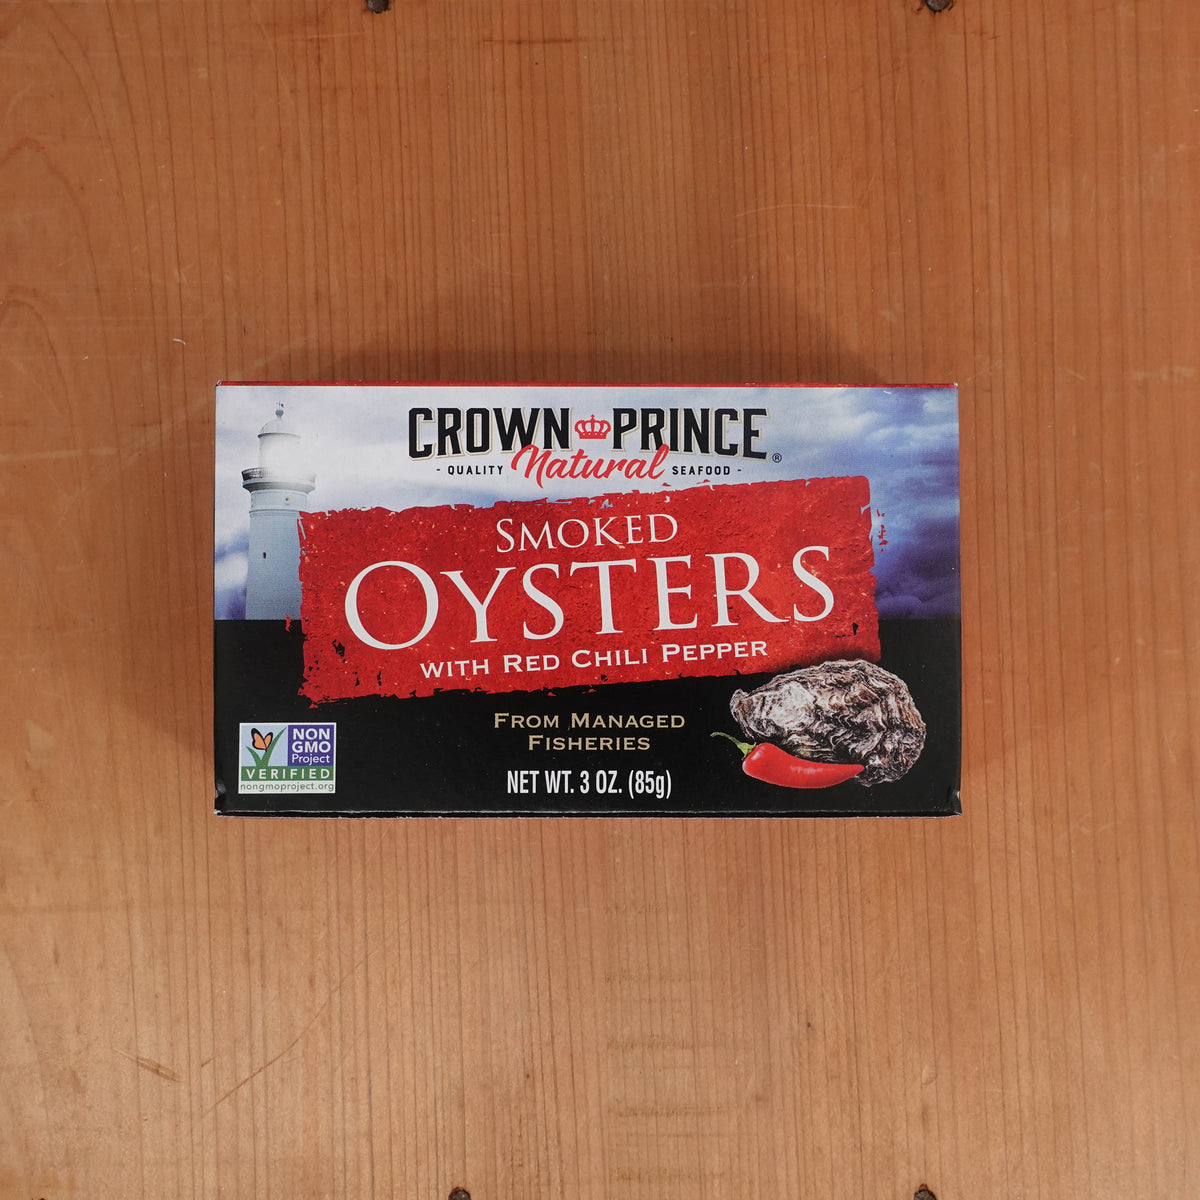 Crown Prince Natural Smoked Oysters with Red Chili Pepper - 3oz